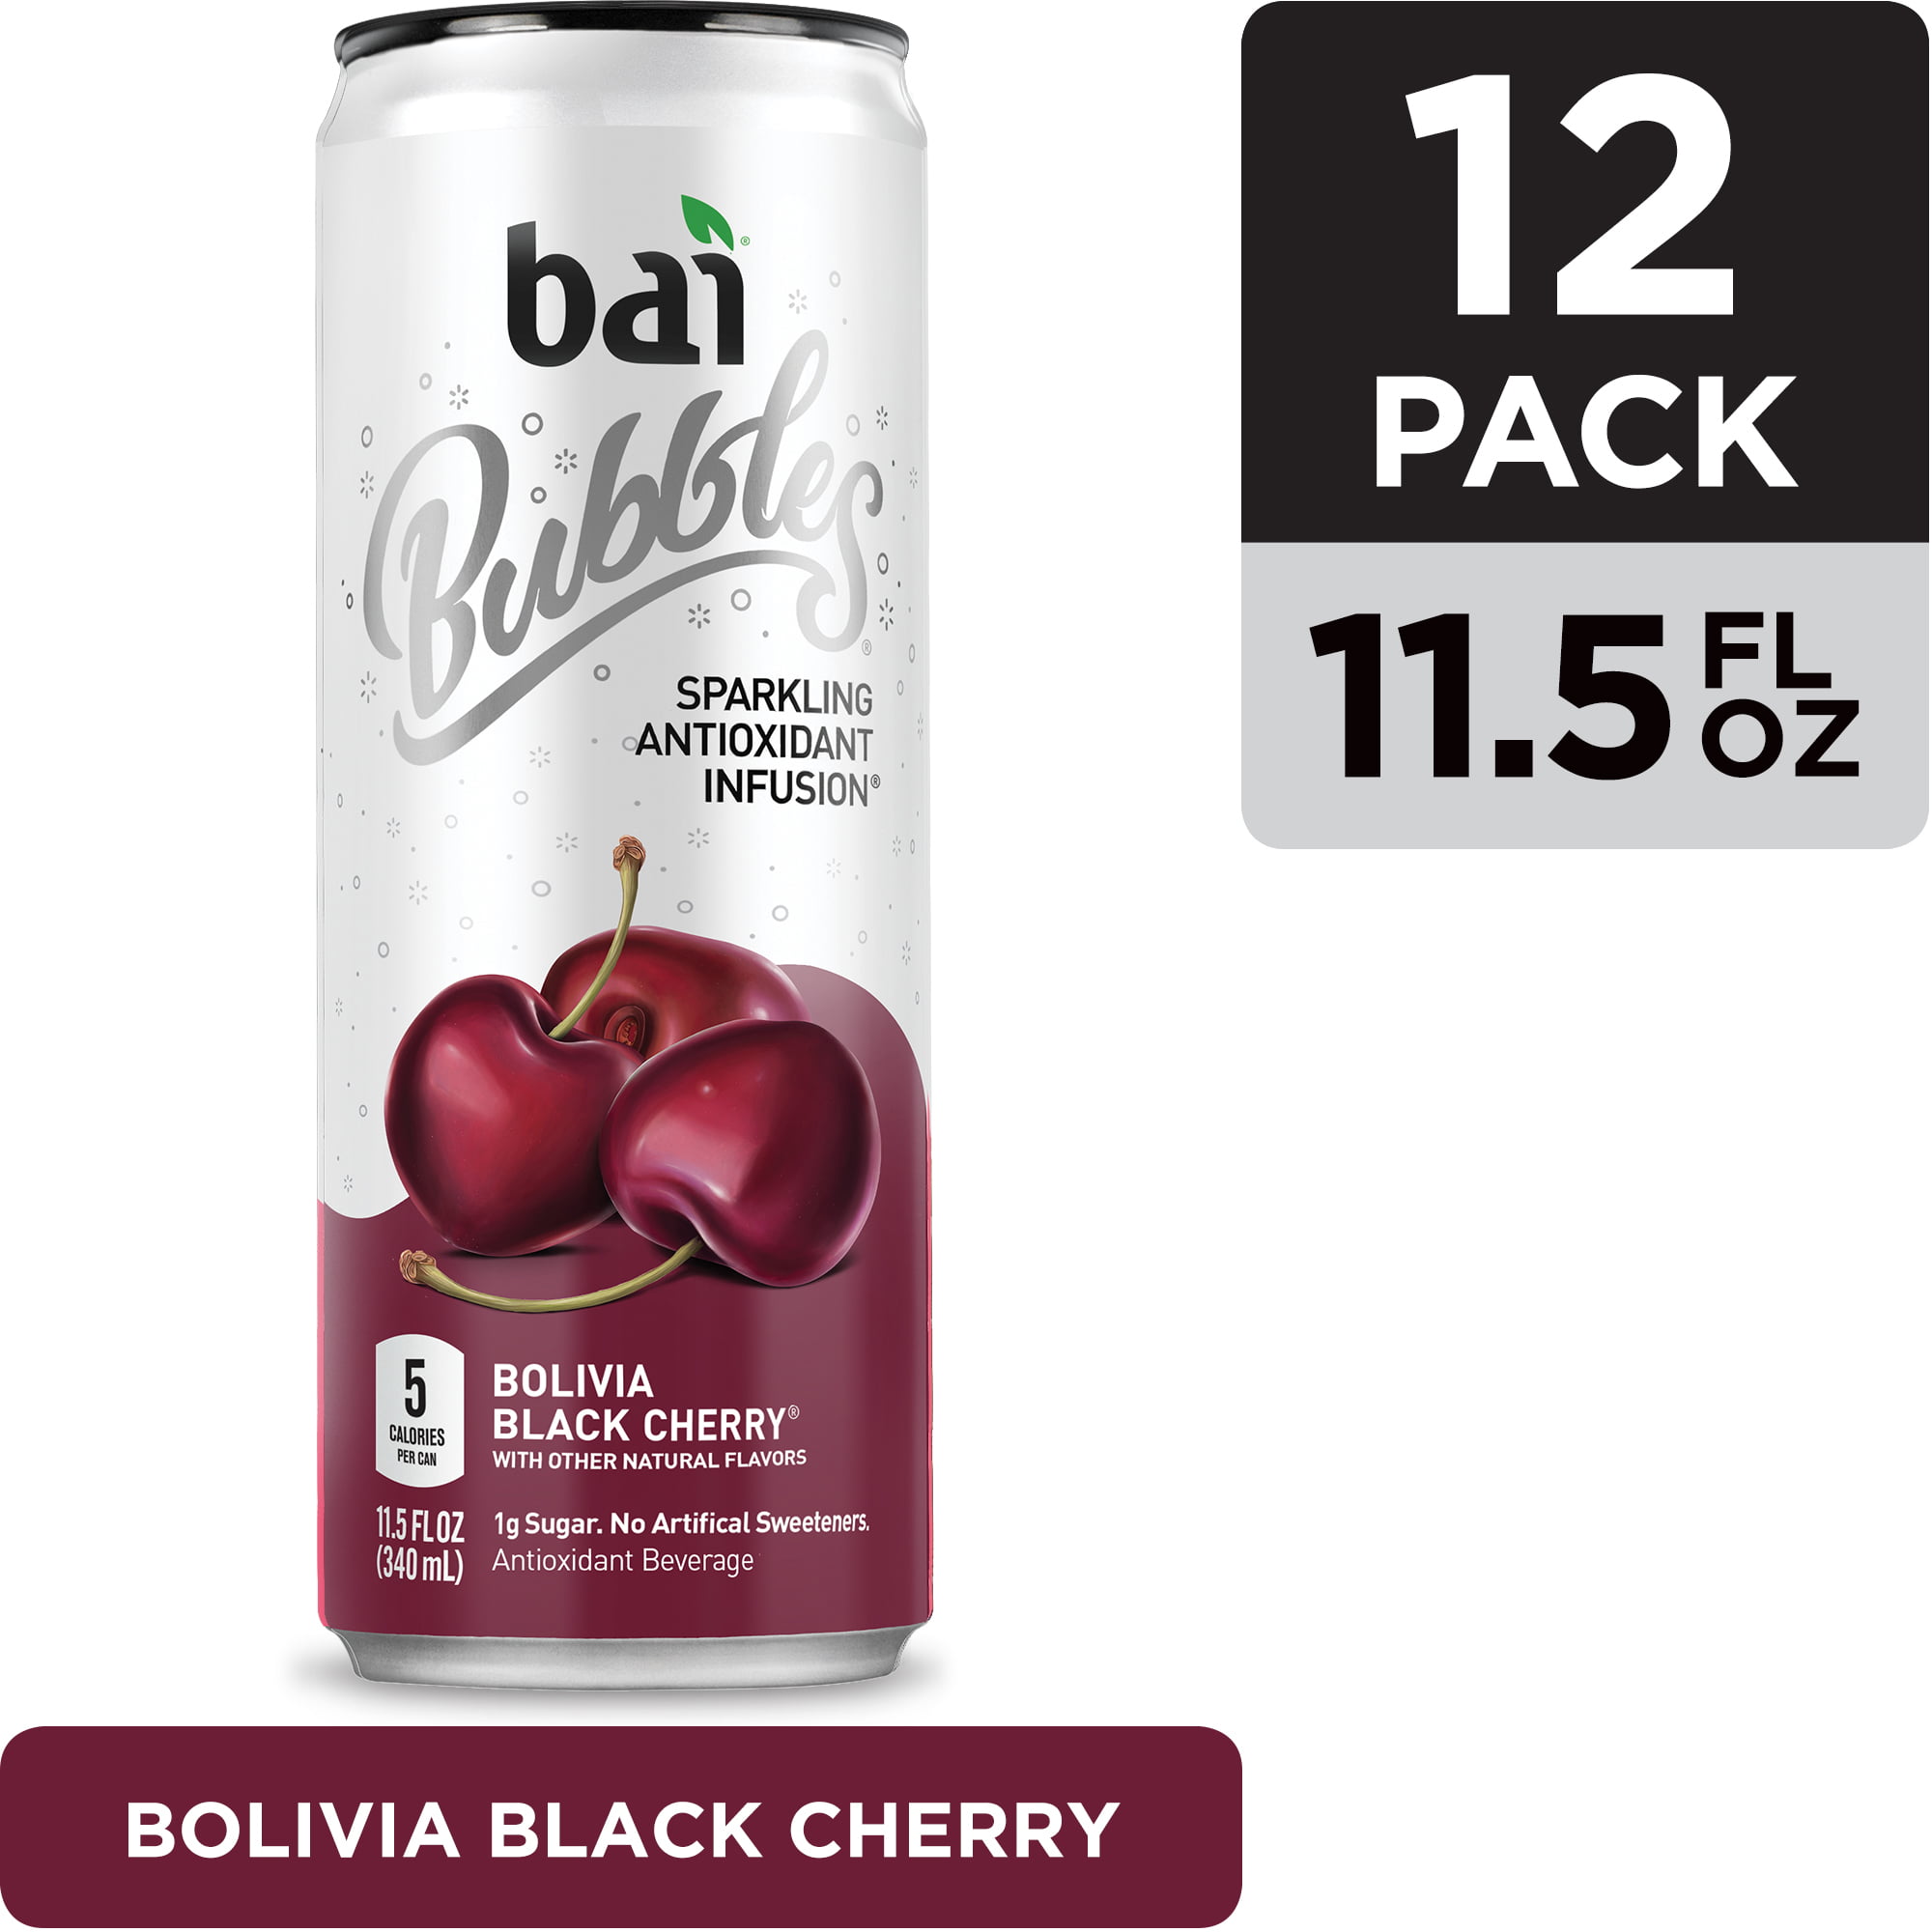 Photo 1 of Bai Bubbles, Sparkling Water, Bolivia Black Cherry, Antioxidant Infused Drinks, 11.5 Fluid Ounce Cans, 12 count